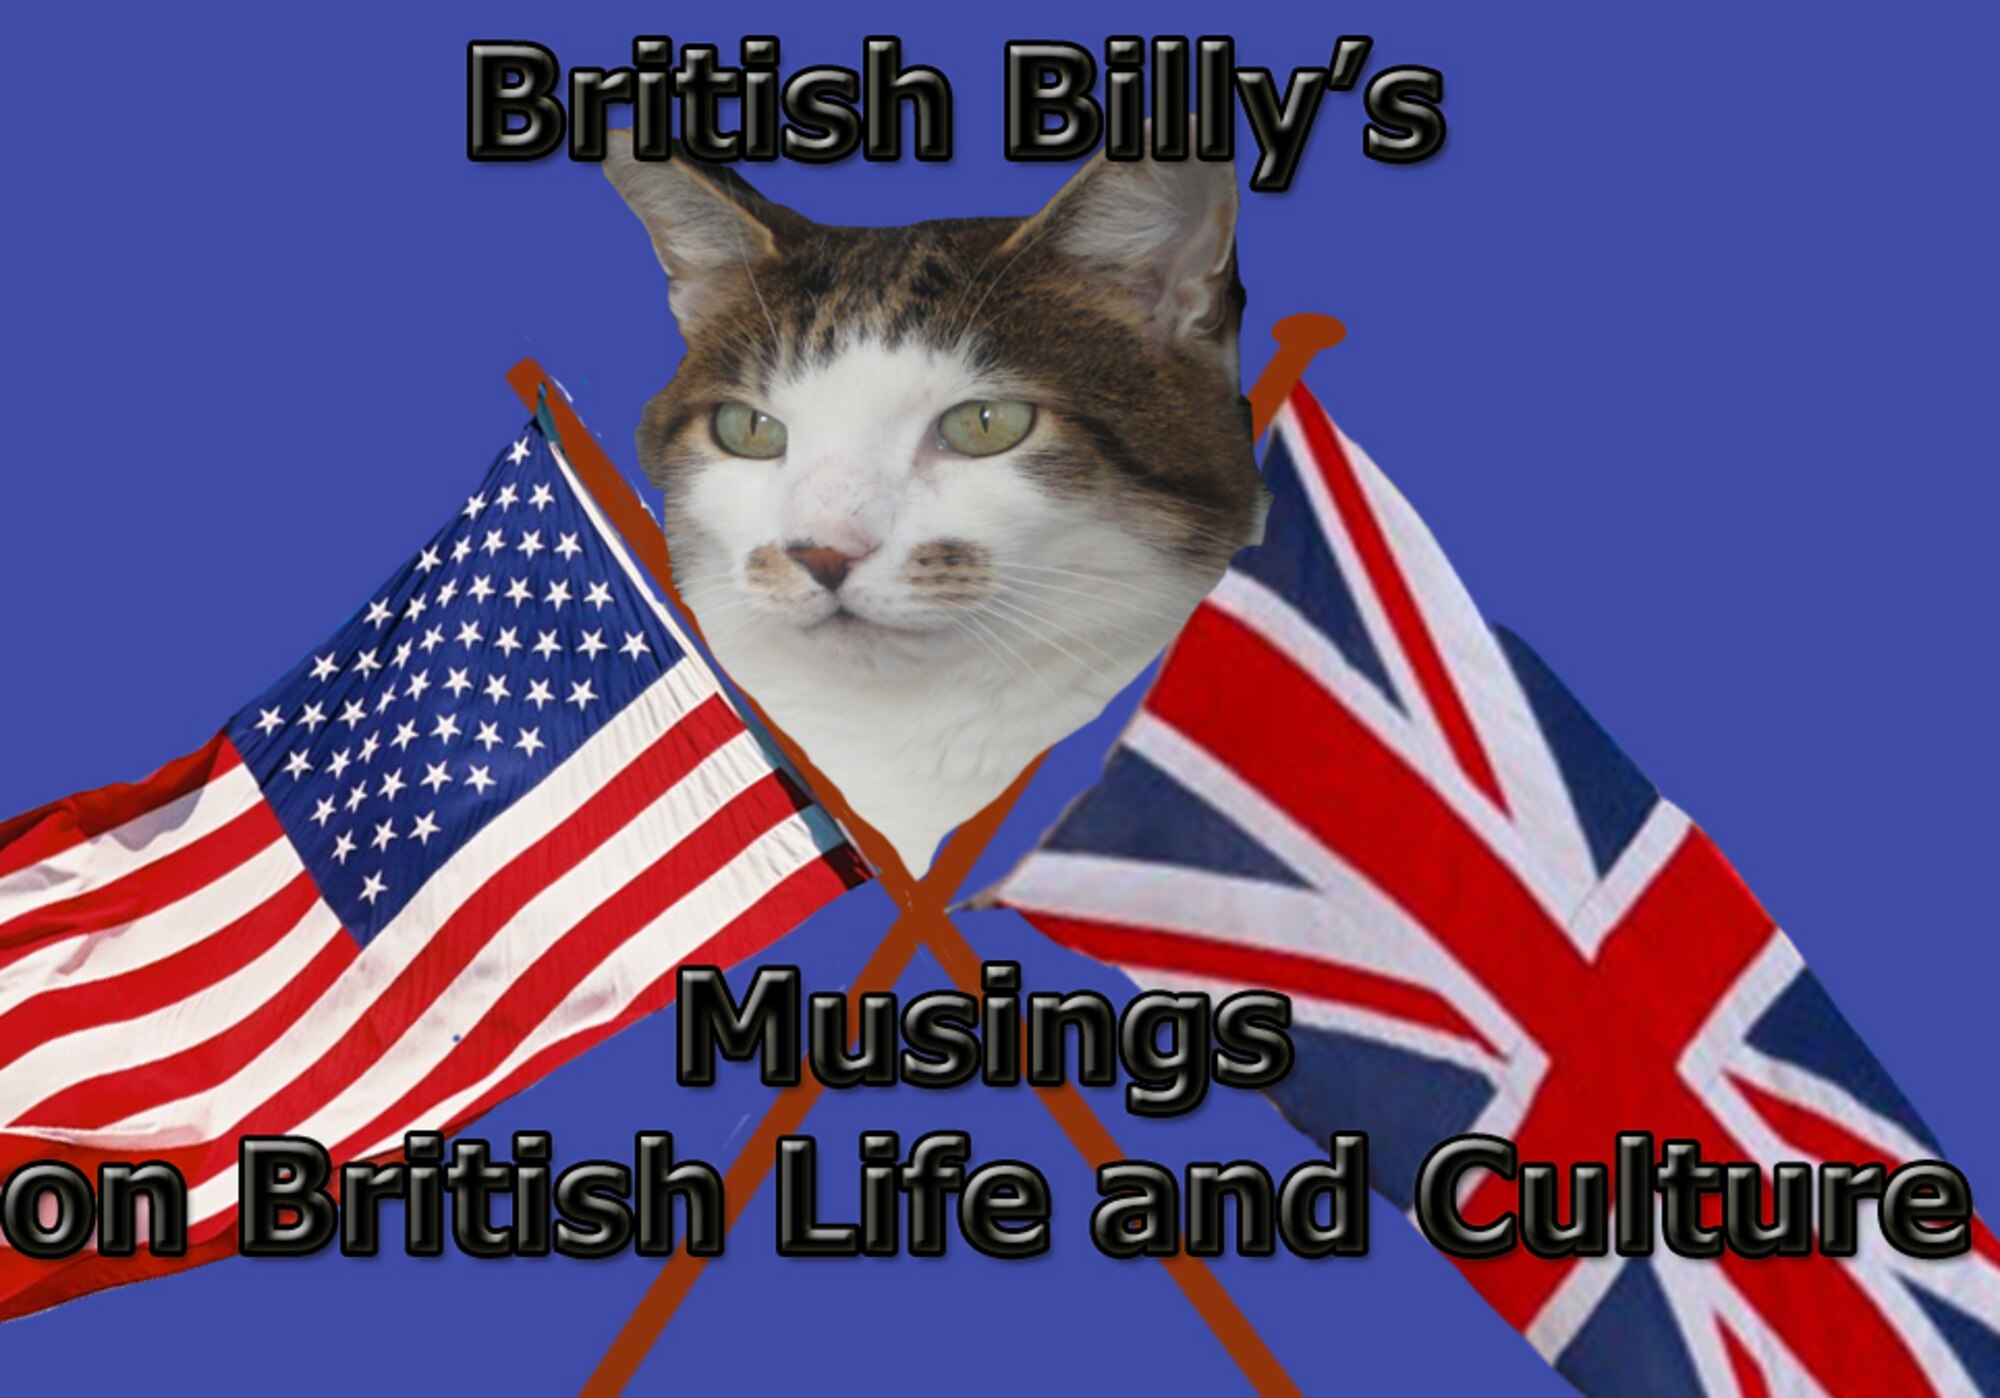 Billy the Cat (aka British Billy) lives in Elveden, a local village about ten miles from RAF Lakenheath. Billy has been around a bit. He came from a rescue centre and prefers not to dwell on the past. He is proud of his country and its heritage and counts his friends and family as hailing from all corners of the British Isles. He is proud to be a “moggy”. Many of his American friends and admirers ask Billy about the things puzzling them about life and culture in the U.K., and if he doesn’t know the answer, he has ways and means of finding out. Feel free to send him any questions, and when he isn’t sleeping or hunting, he’ll try and put a few thoughts together to help you out.
